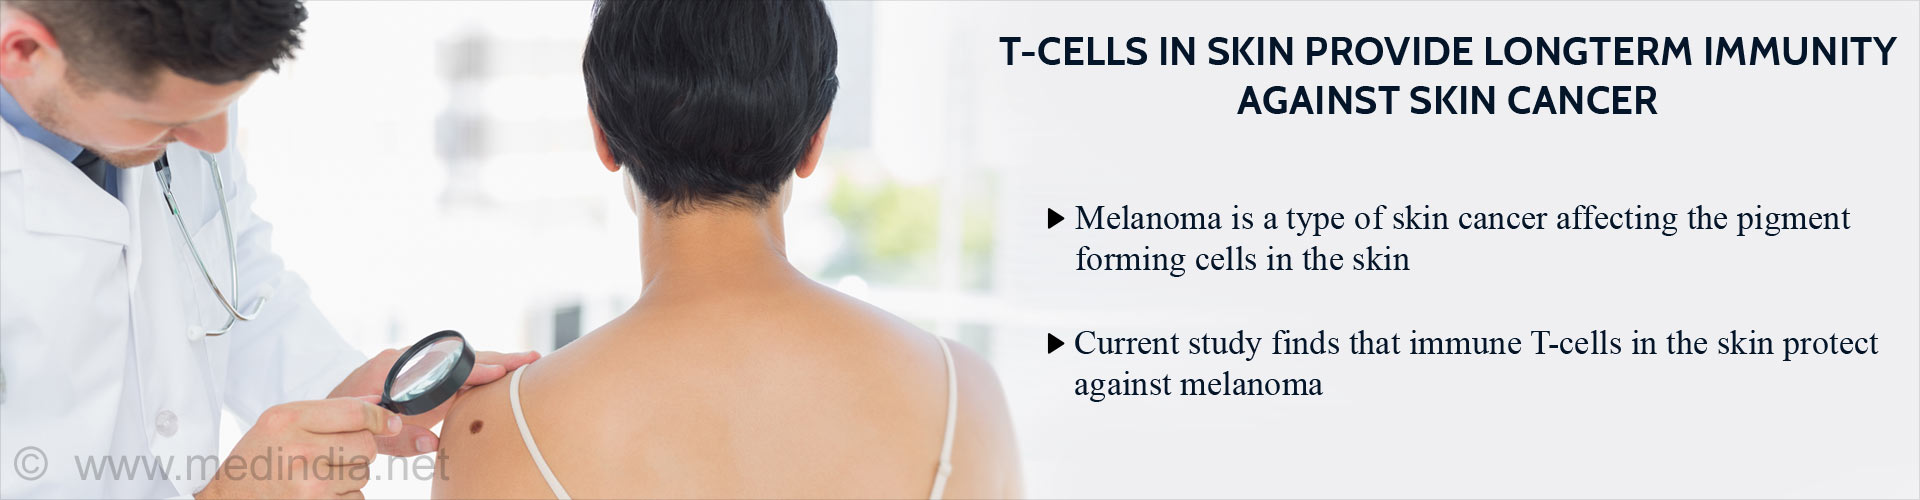 T-cells in skin provide longterm immunity against skin cancer
- Melanoma is a type of skin cancer affecting the pigment forming cells in the skin
- Current study finds that immune T-cells in the skin protect against melanoma